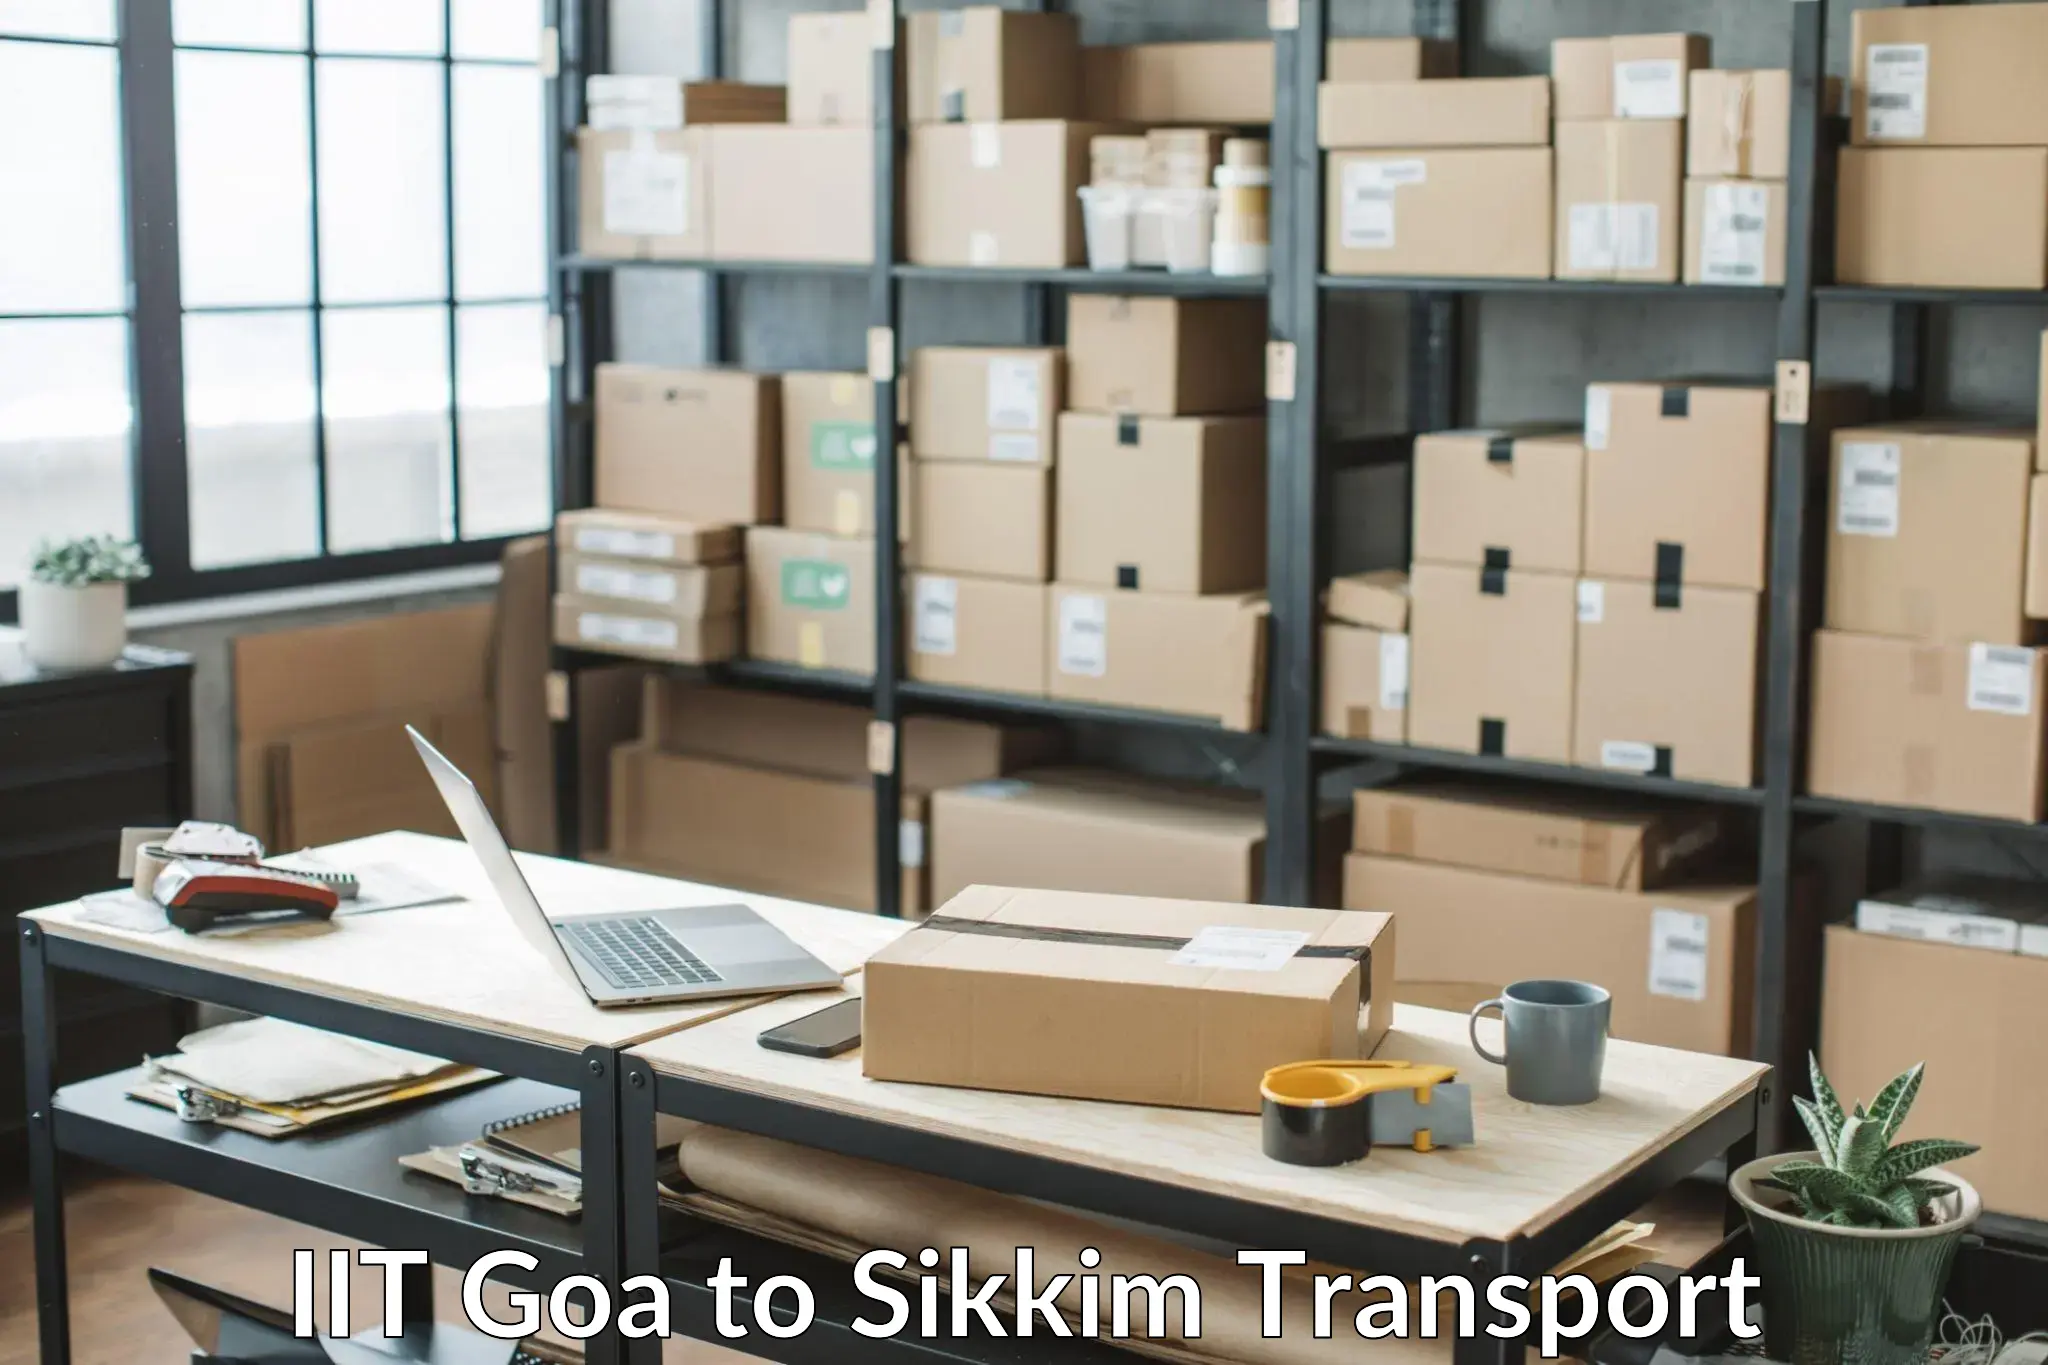 Cycle transportation service IIT Goa to East Sikkim